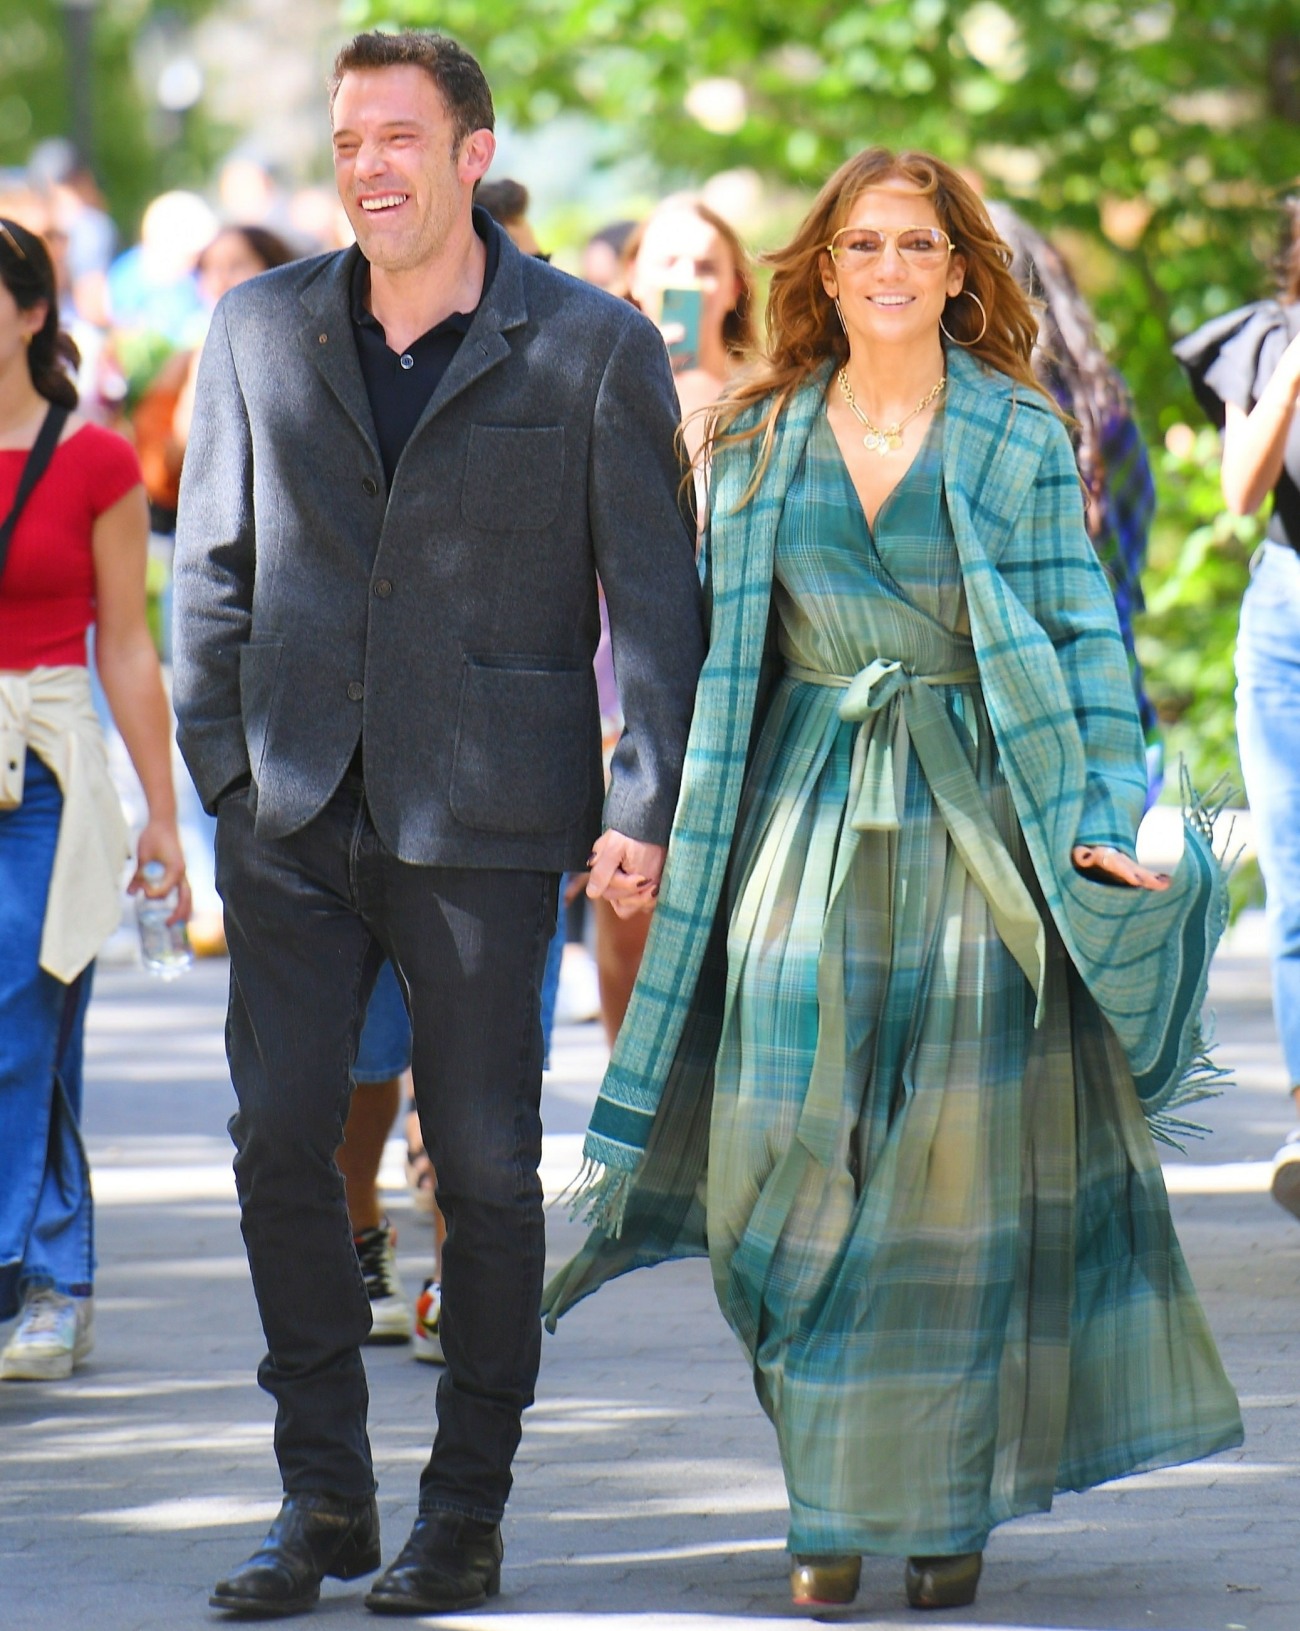 Jennifer Lopez and Ben Affleck spotted packing on the PDA as they go for a walk in Madison Square Park